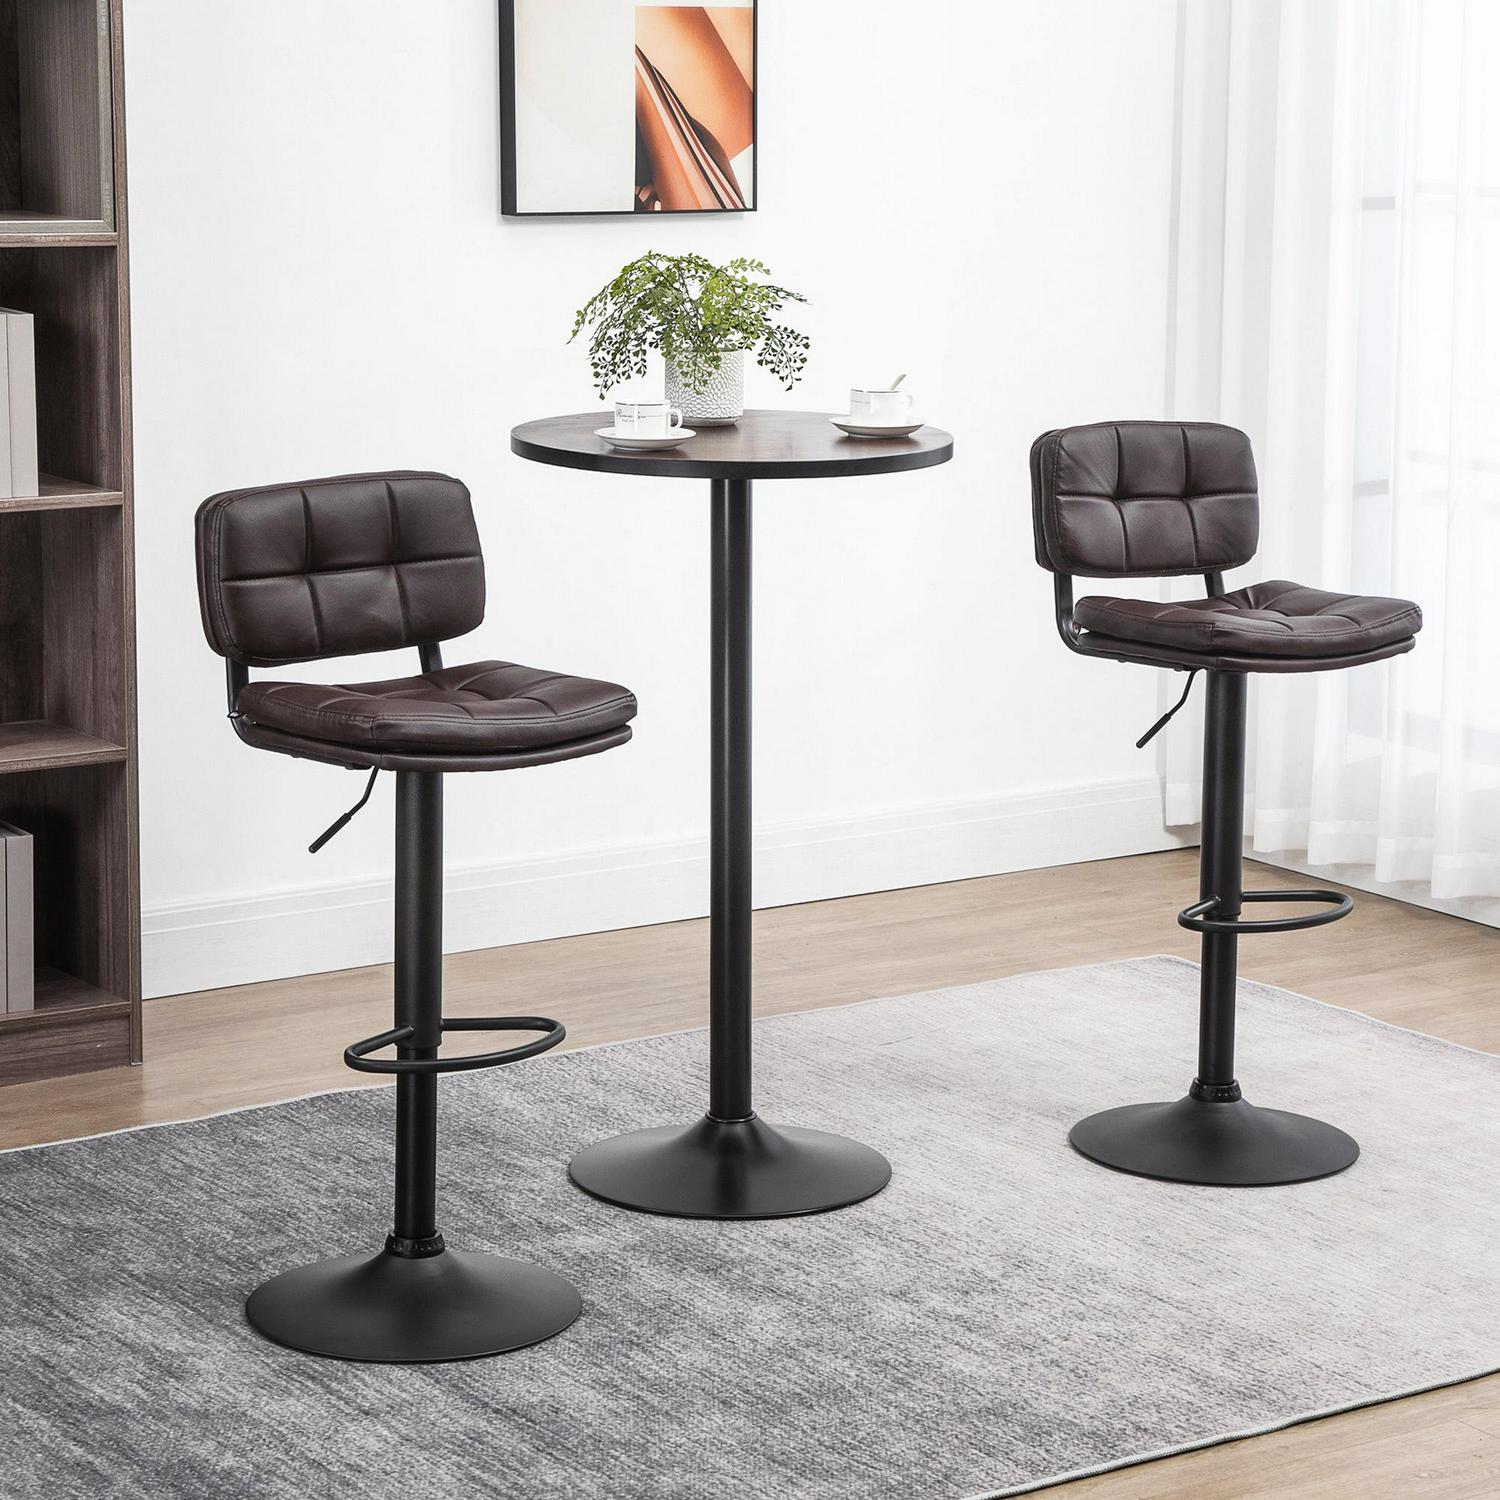 Set Of 2 Swivel Breakfast Bar Stools With Back - Brown